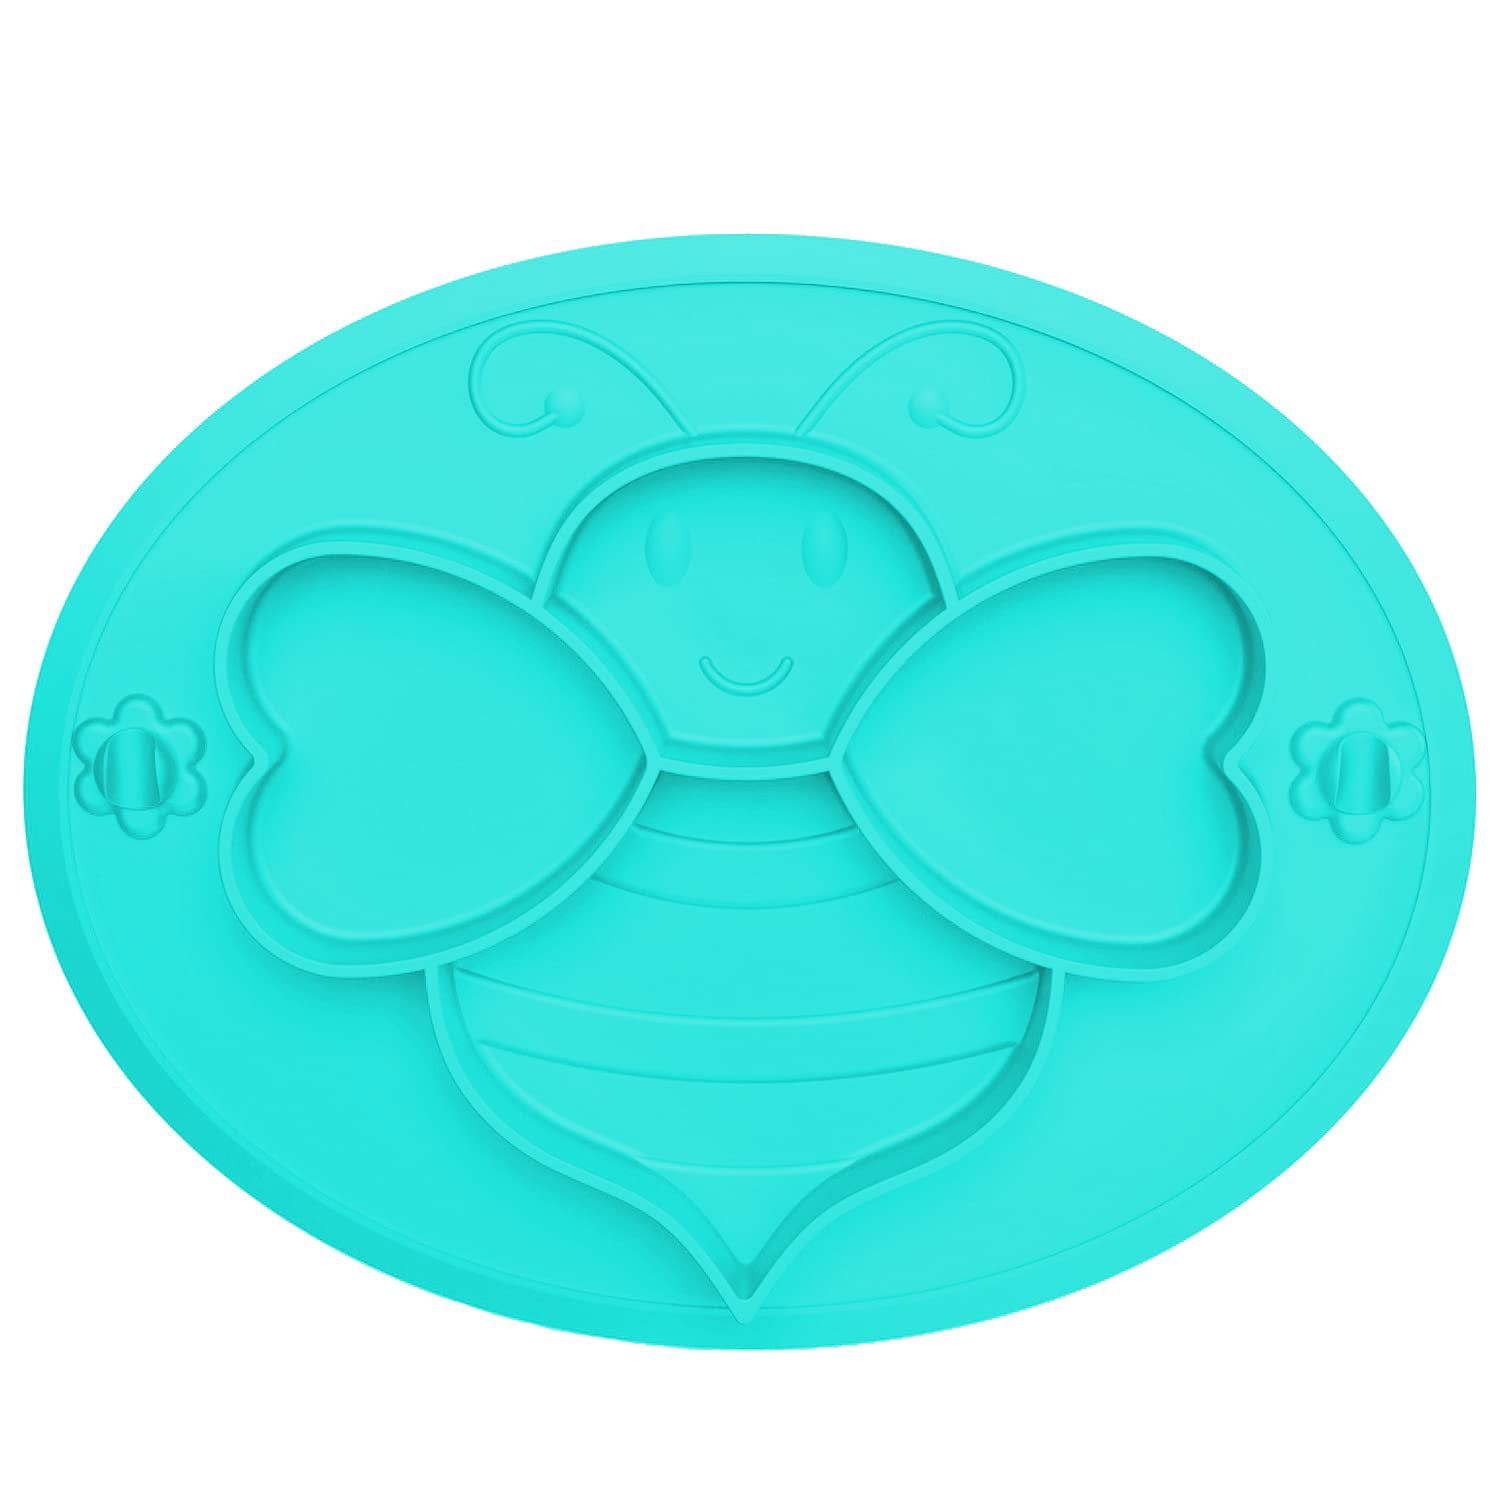 Non-Slip BPA-Free Light Green,Bee Shape Toddler Silicone Suction Plates Unbreakable Portable Dinner Toddler Plates Kids Plates Divided Bee Design Plate for Baby Kids Toddler Food 